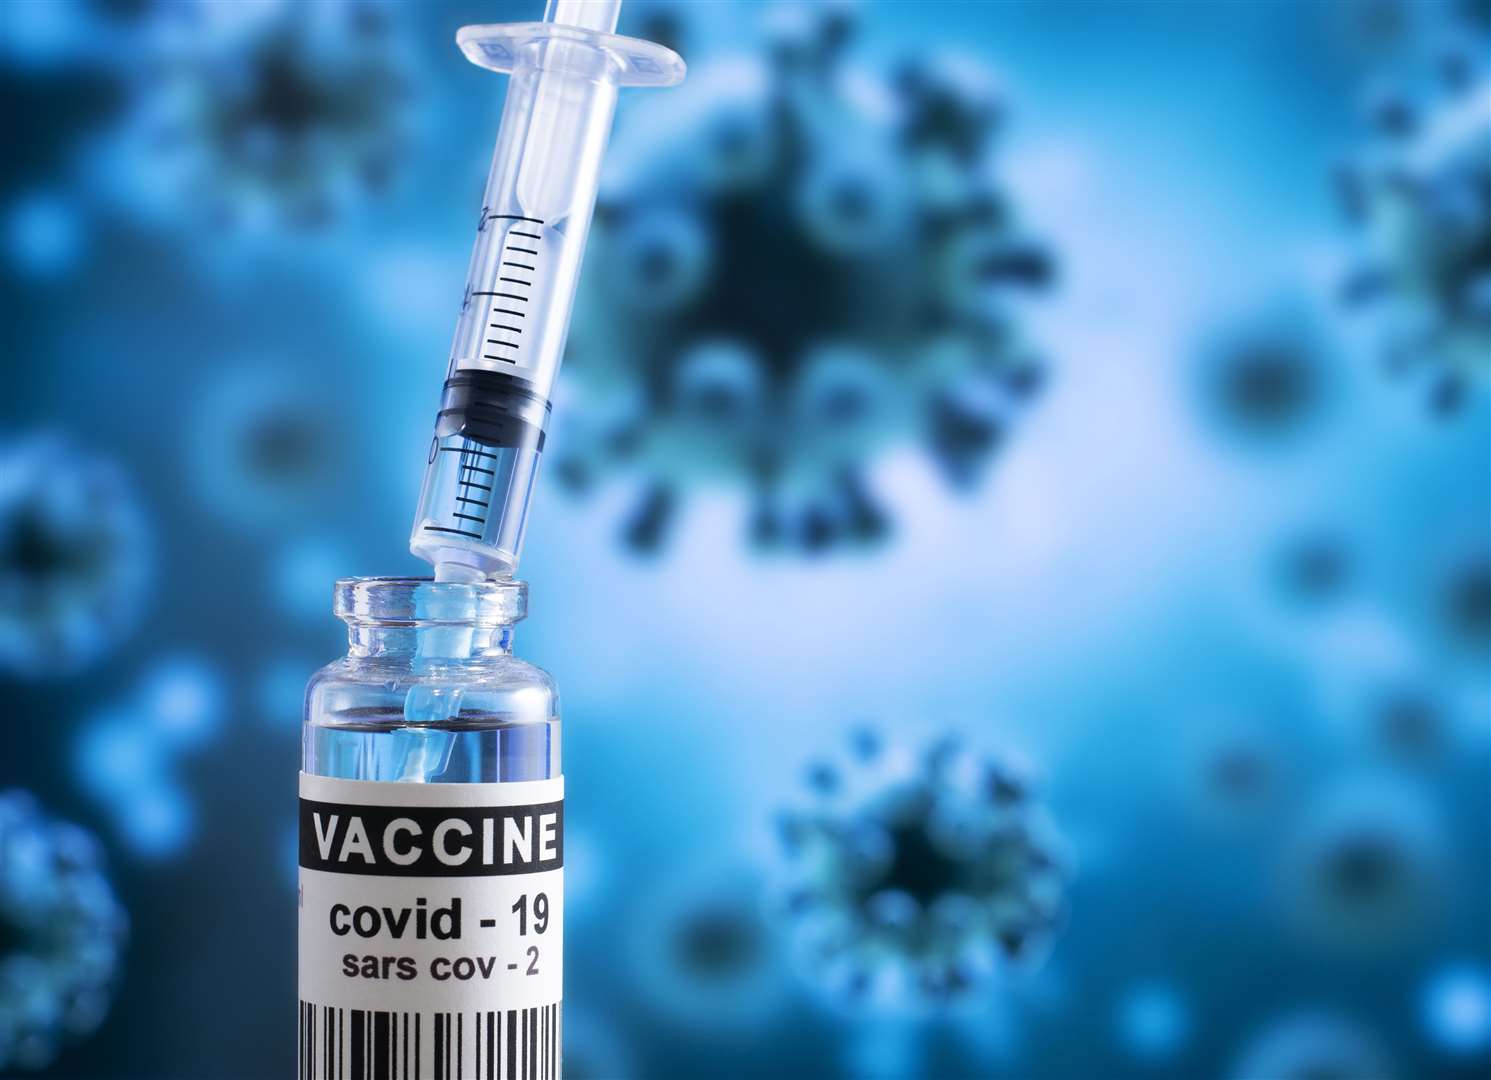 Patients aged 38 and 39 are expected to be offered an alternative to the Oxford vaccine